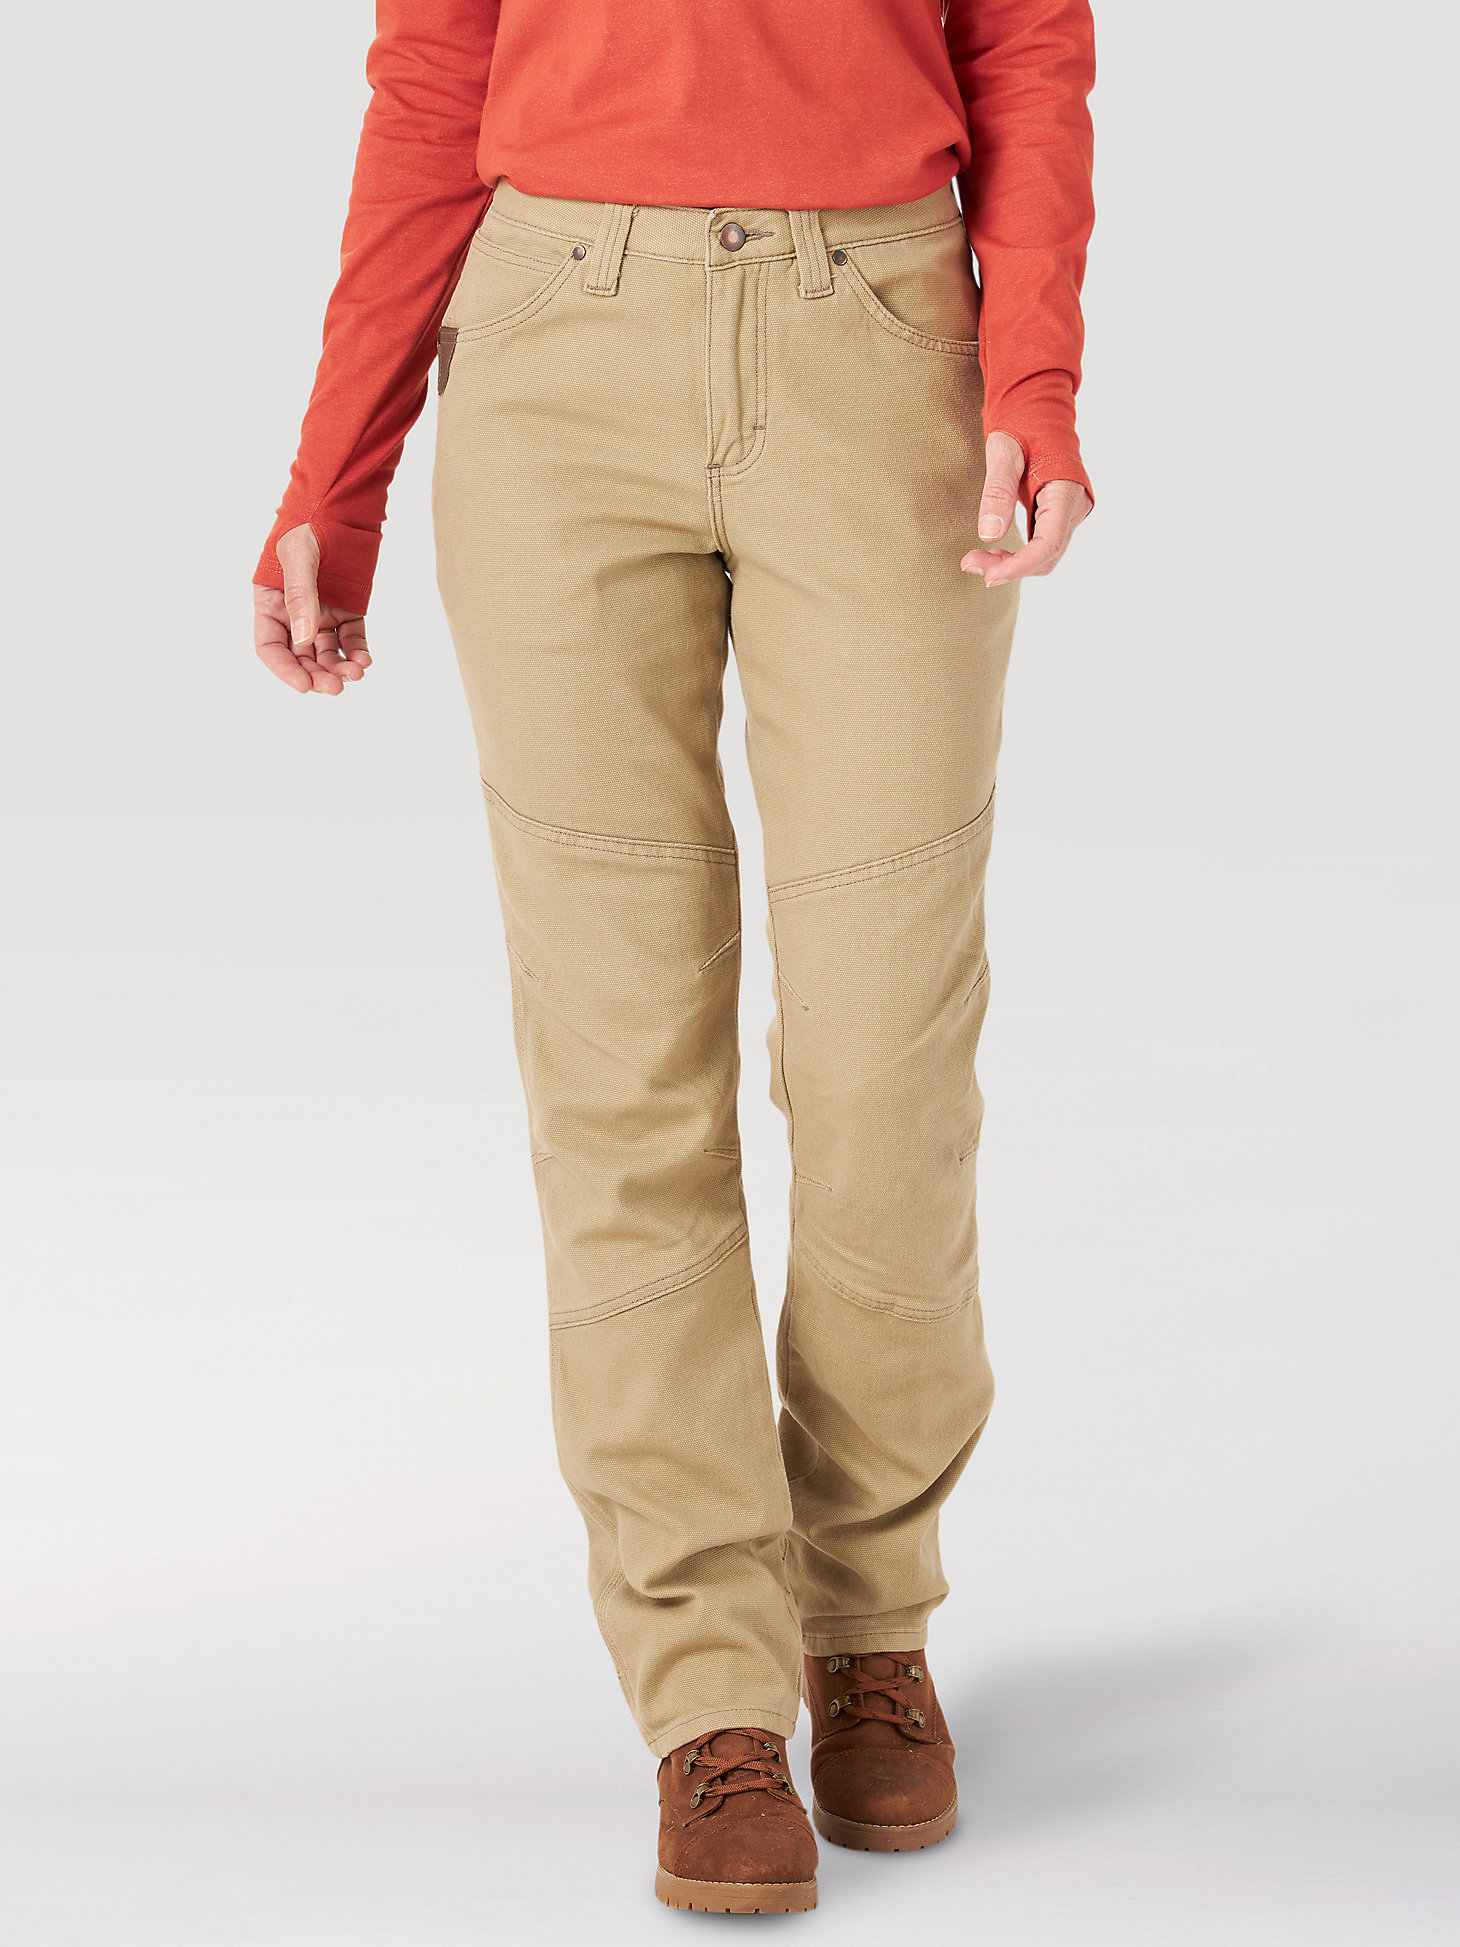 Women's Wrangler® RIGGS Workwear® Straight Fit Utility Work Pant in Golden Khaki main view